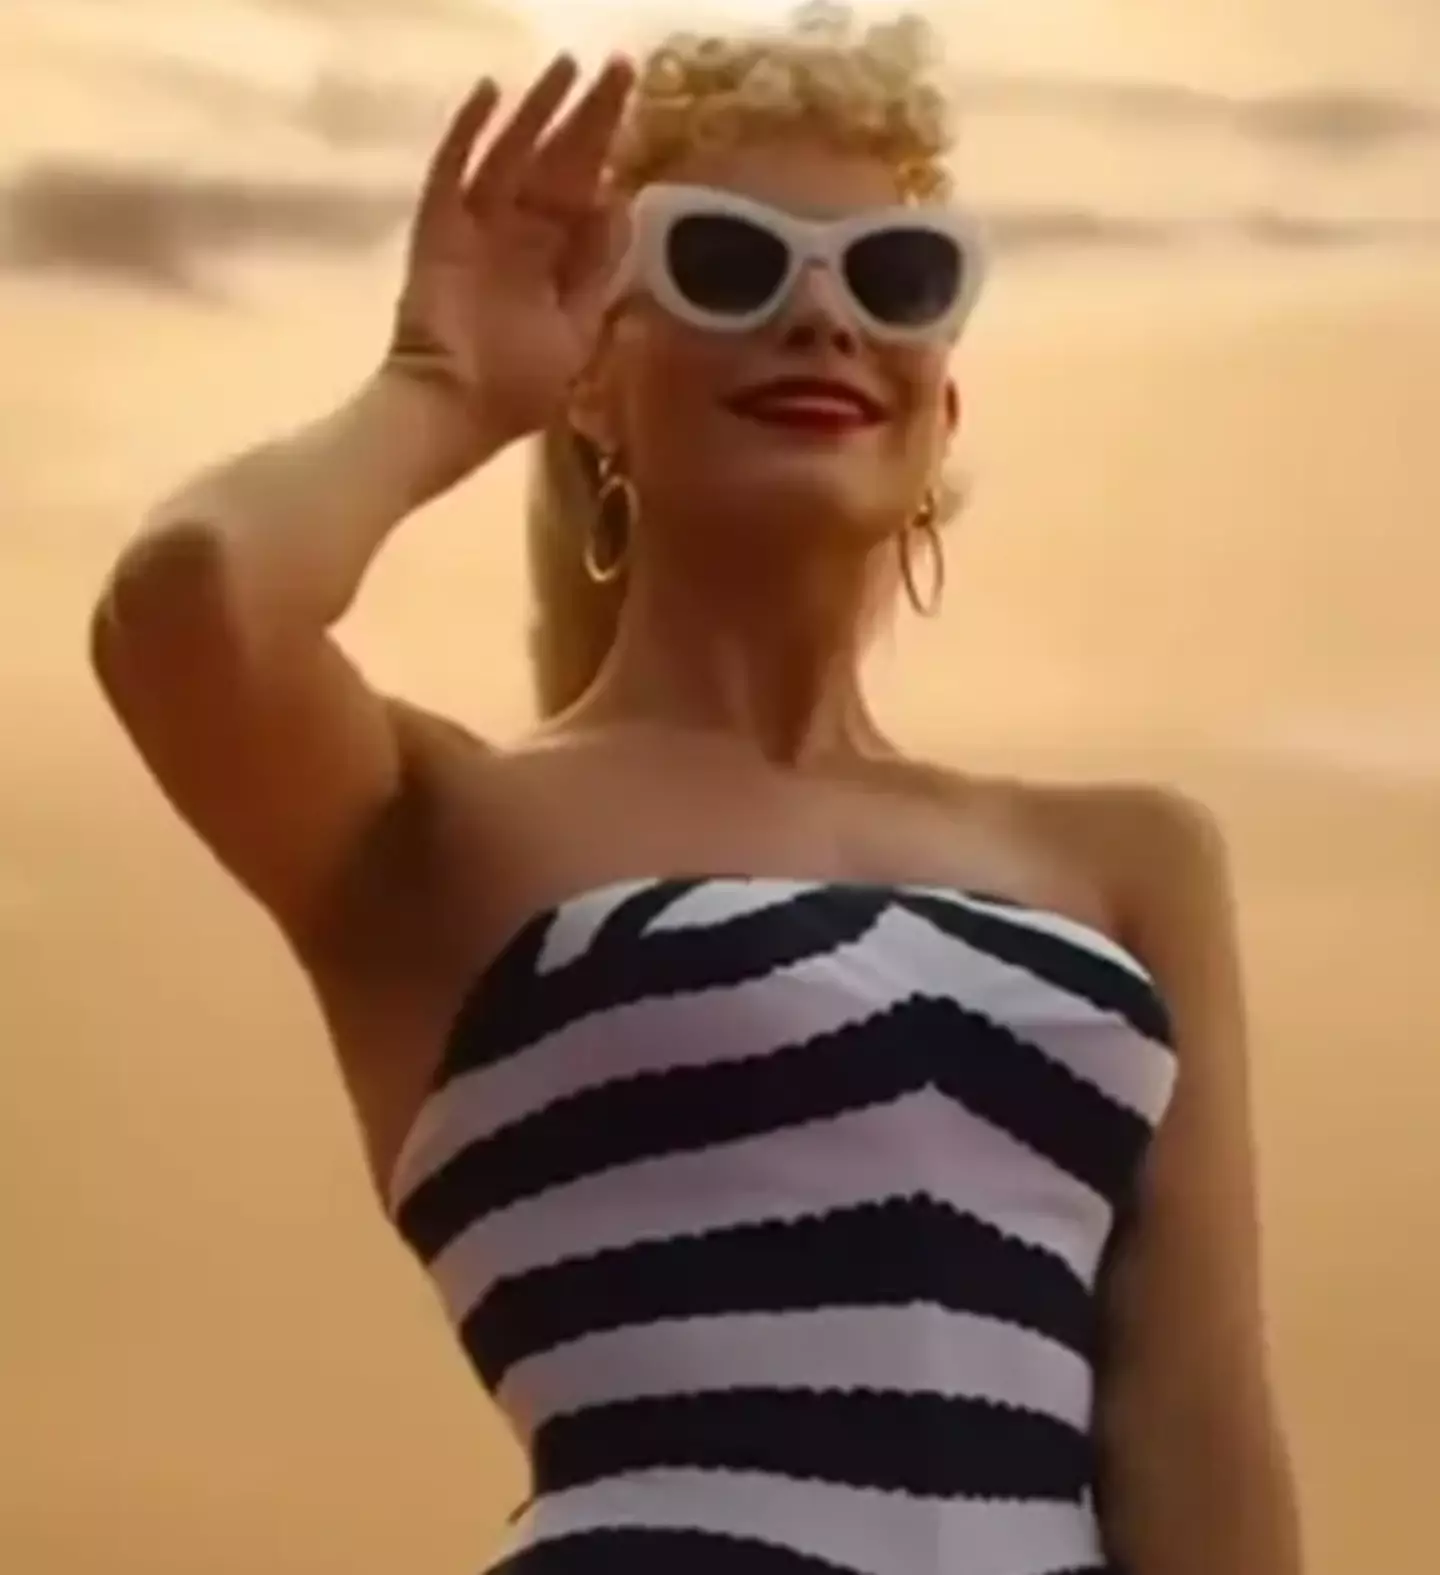 Barbie's first appearance is in her swimsuit.